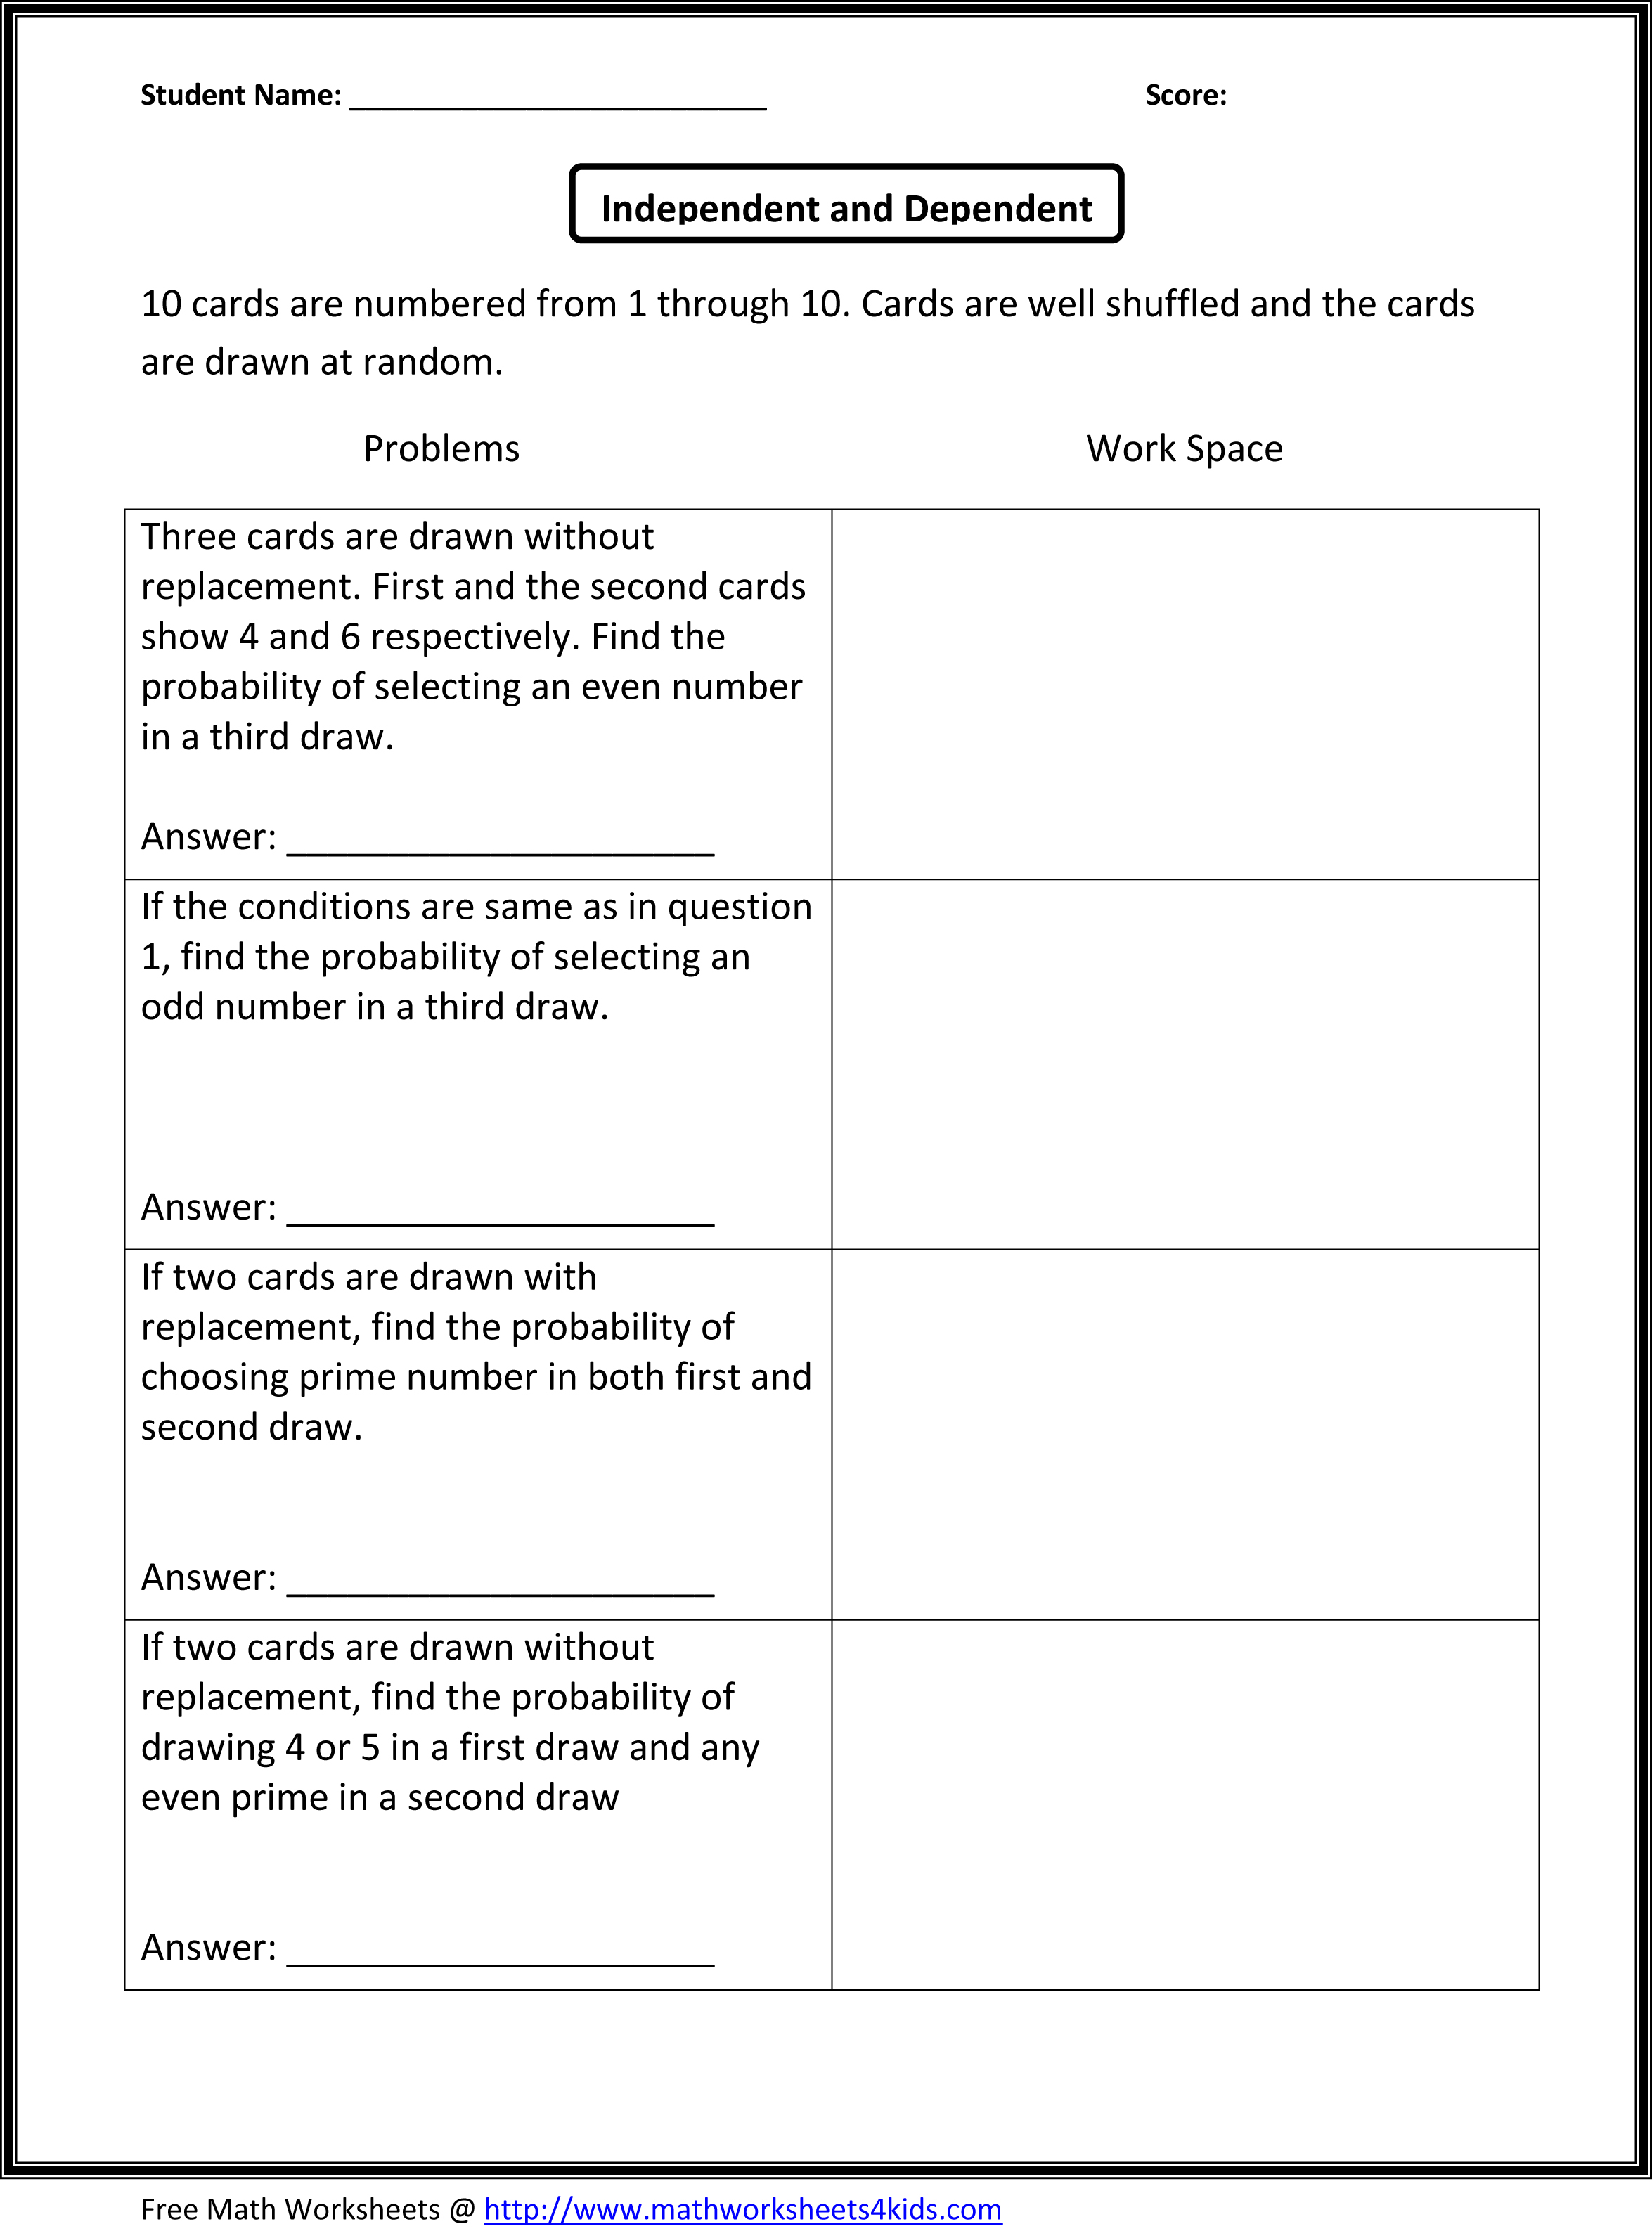 8th Grade Math Probability Worksheets Image